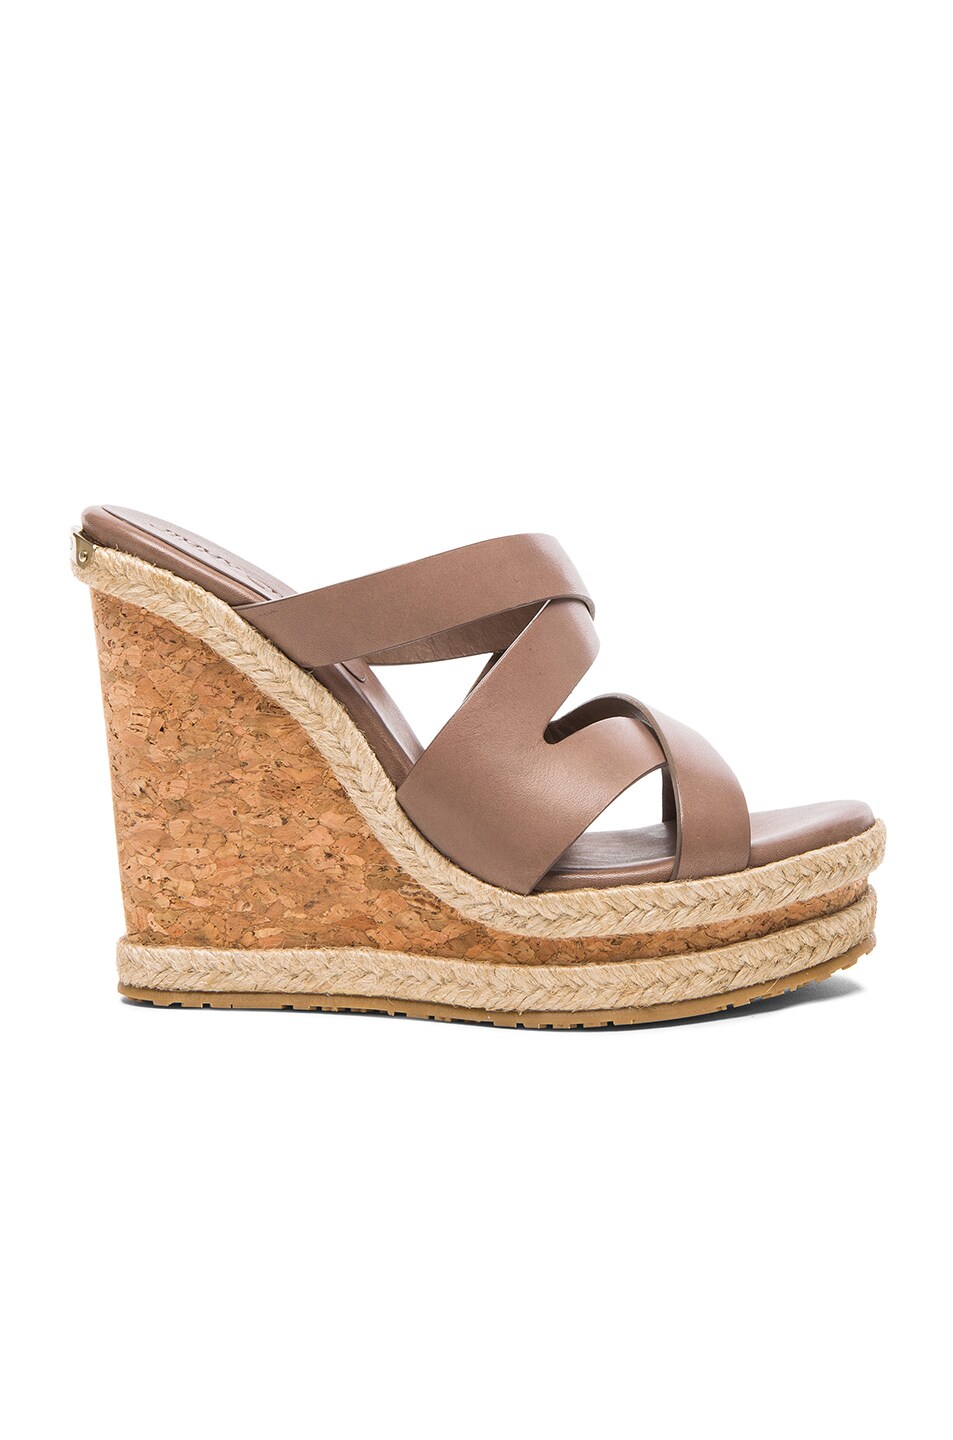 Image 1 of Jimmy Choo Prisma Leather Wedges in Mink